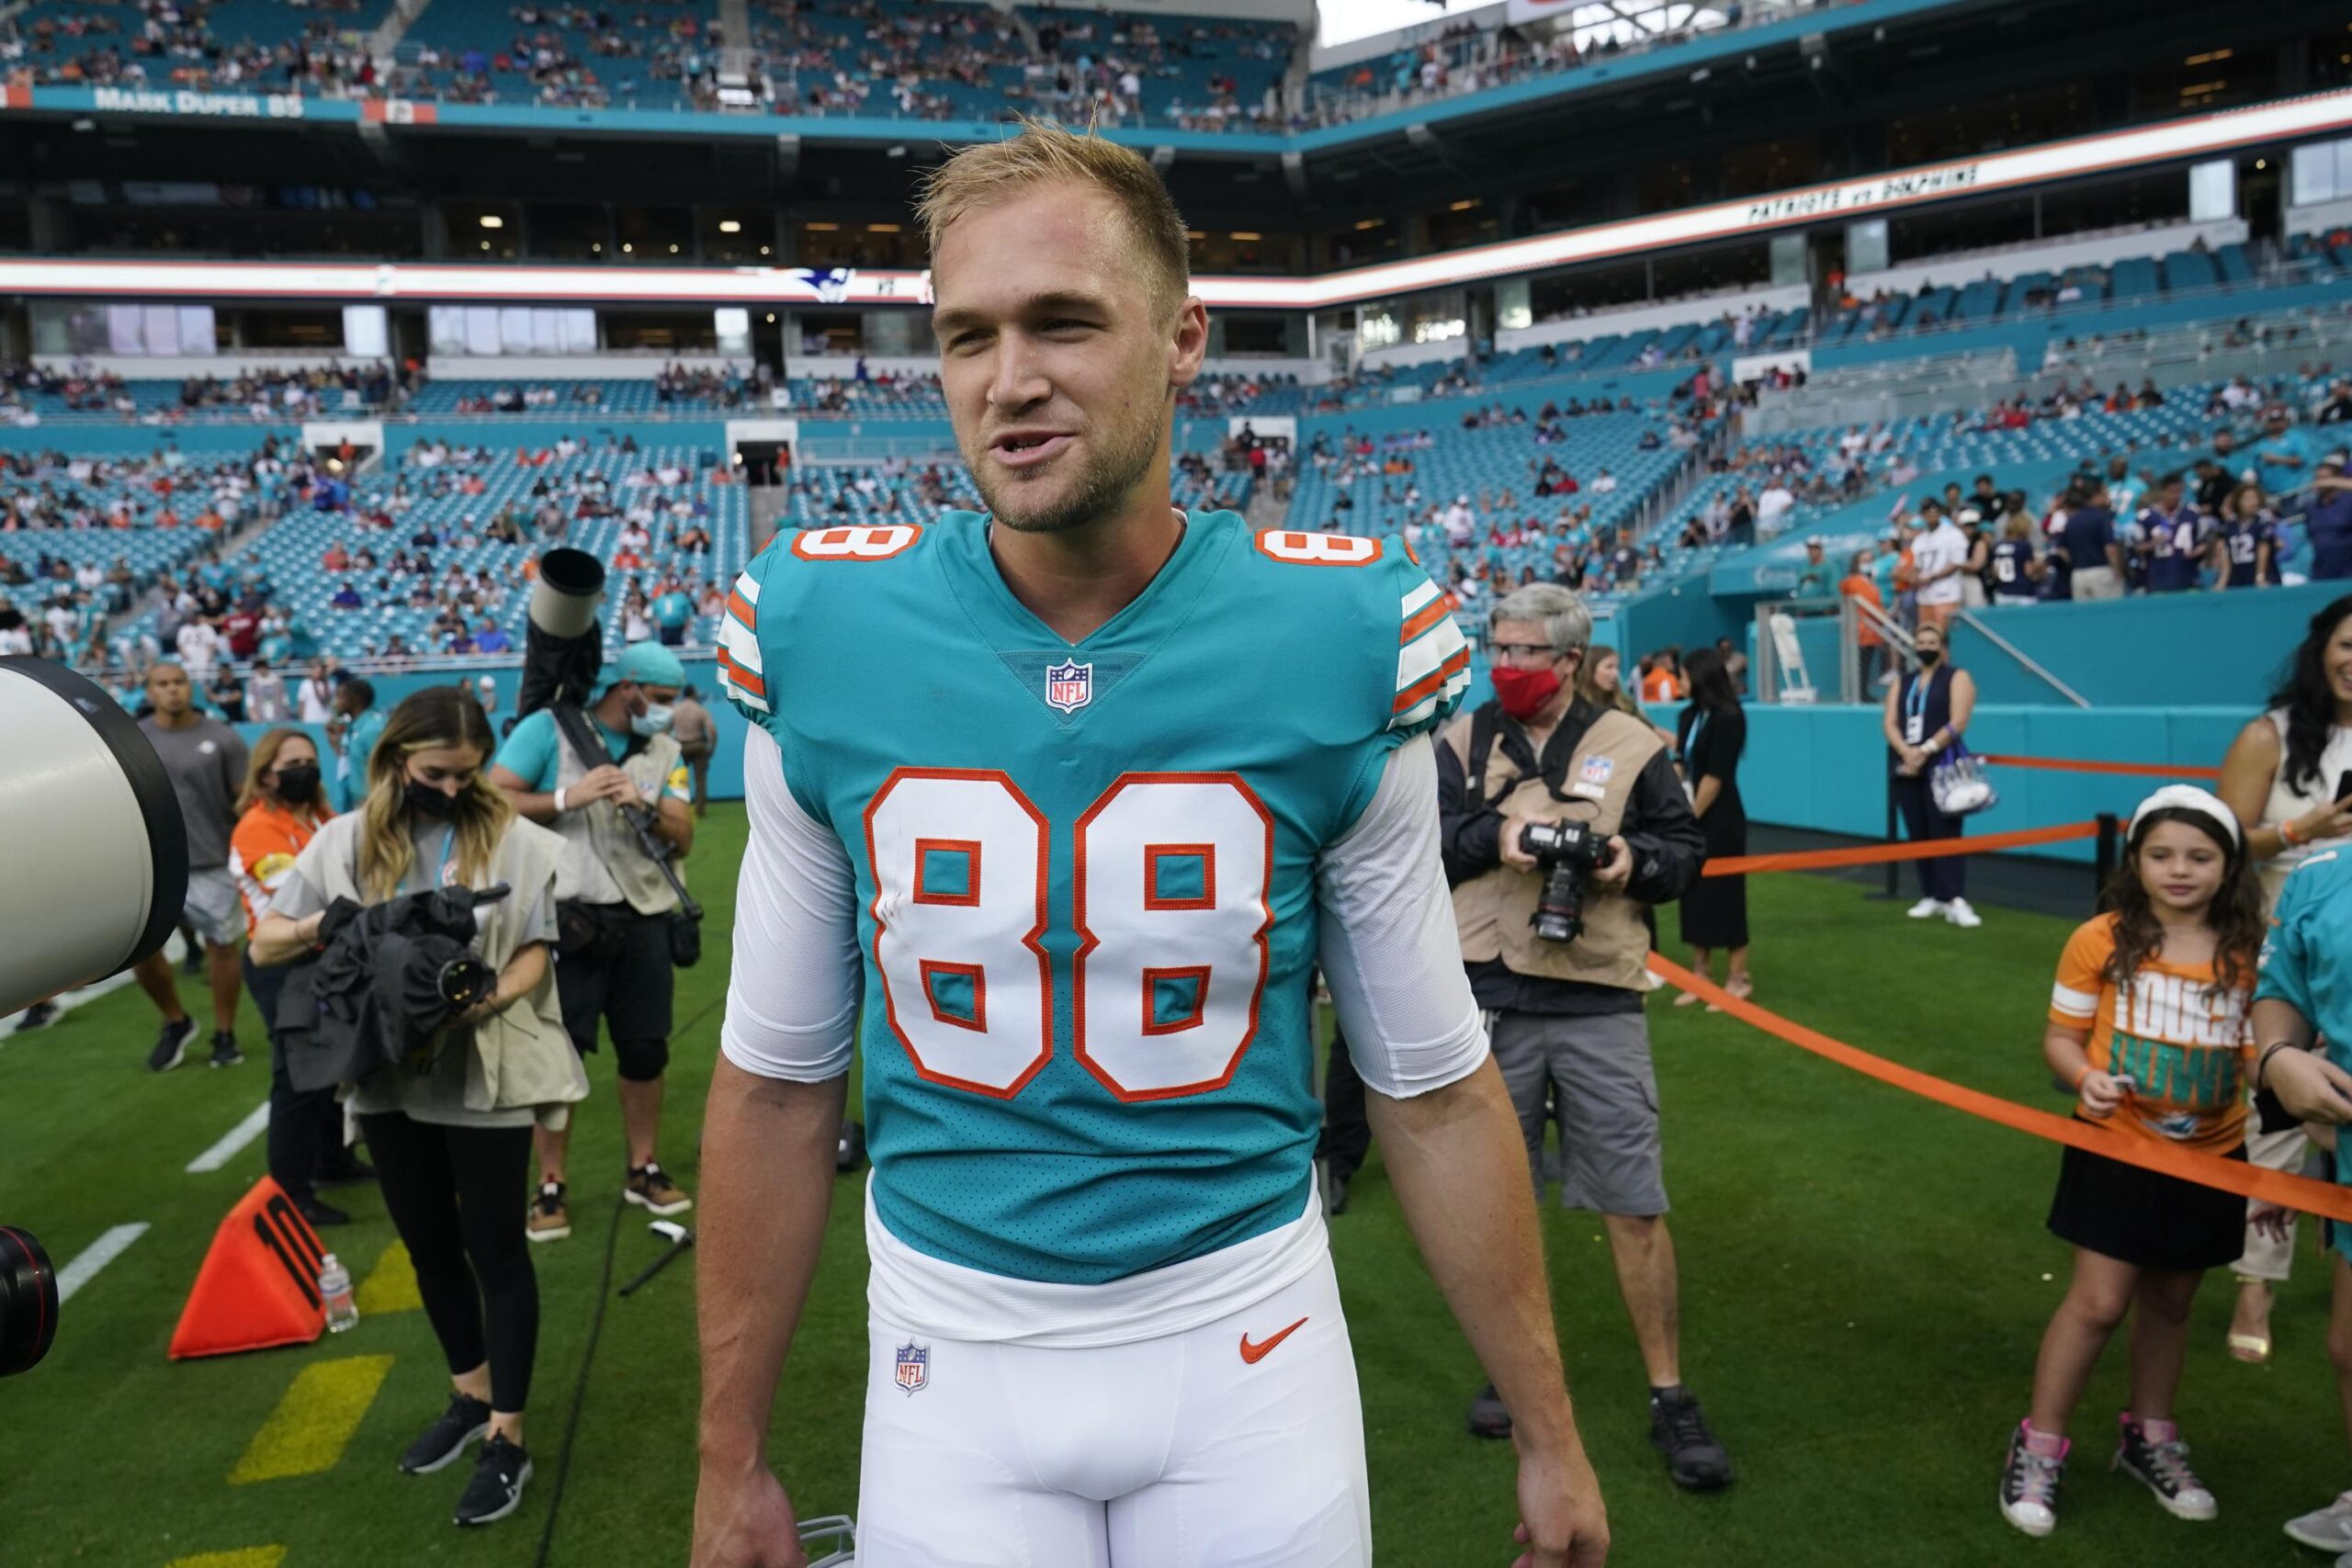 Mike Gesicki Bio, age, height, ethnicity, family, college, 40 time